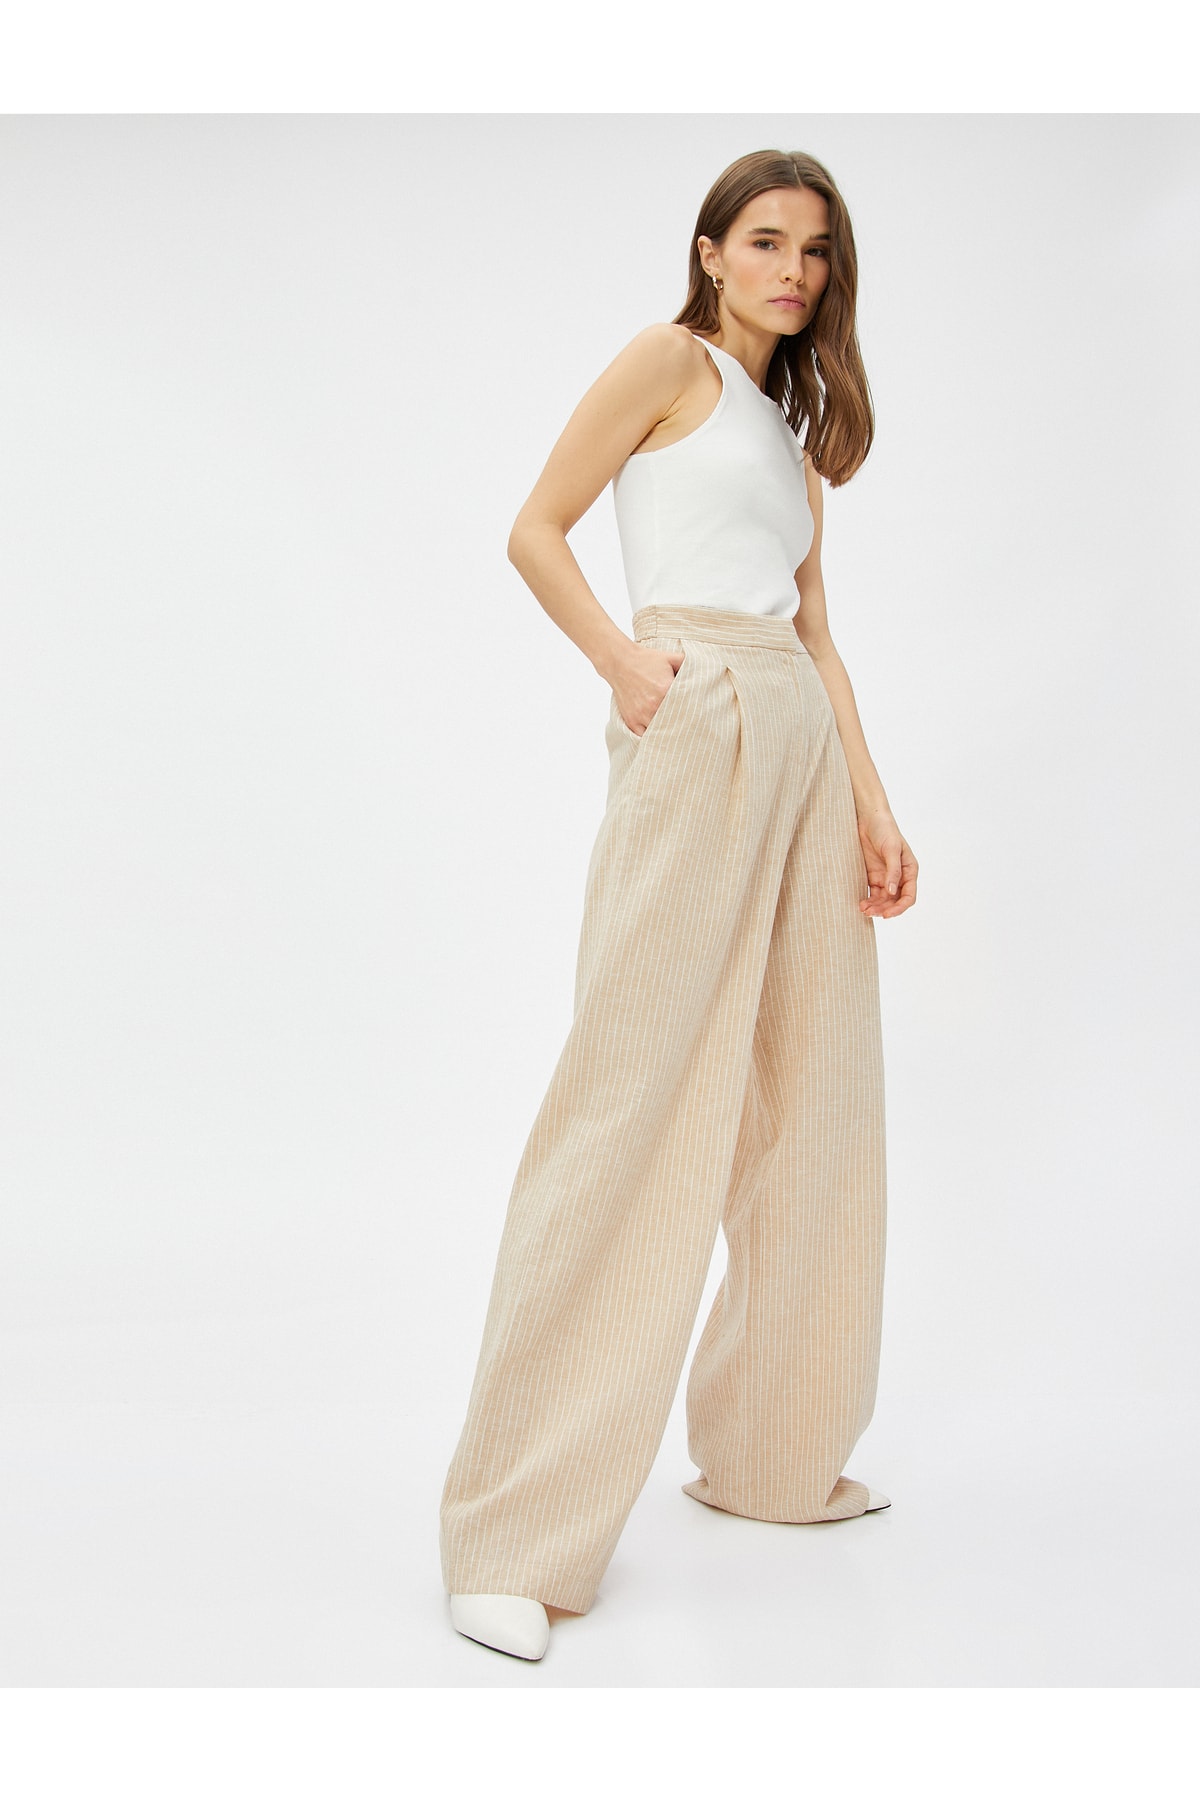 Koton Palazzo Trousers with Pockets Linen Blend